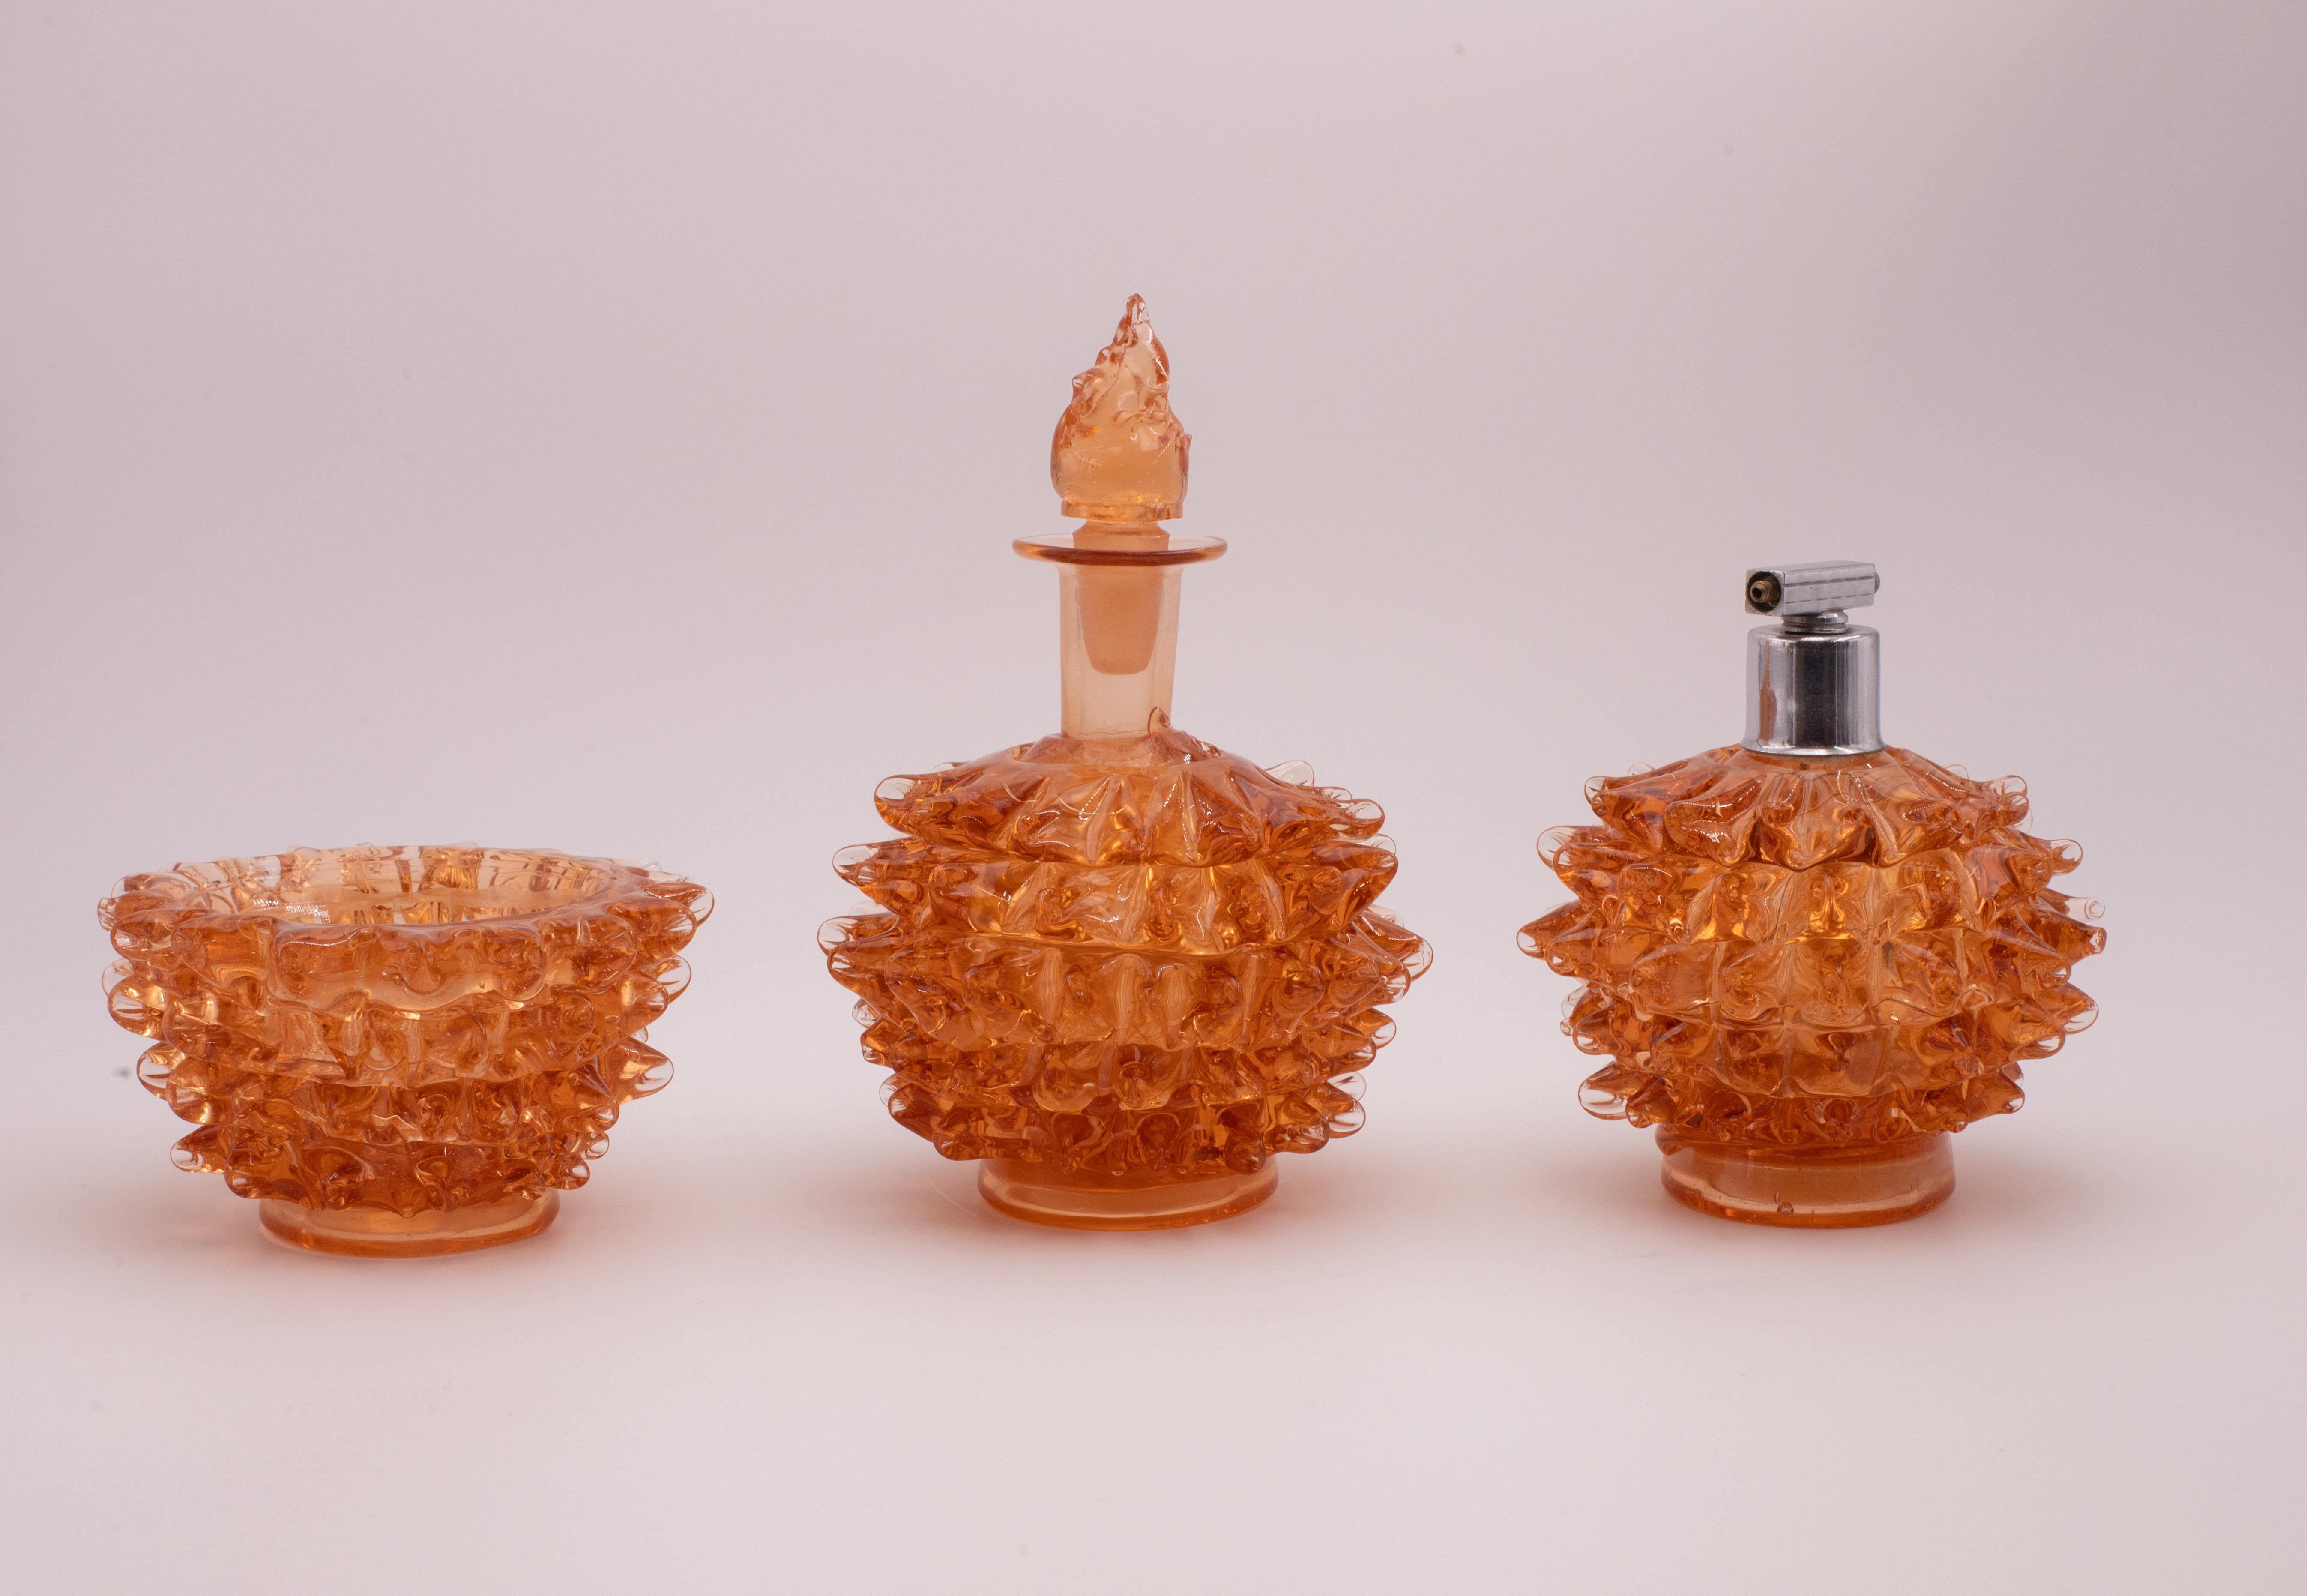 Rare Set of 3 Amber Rostrato Murano Glass Vases by Barovier & Toso, 1940s For Sale 5